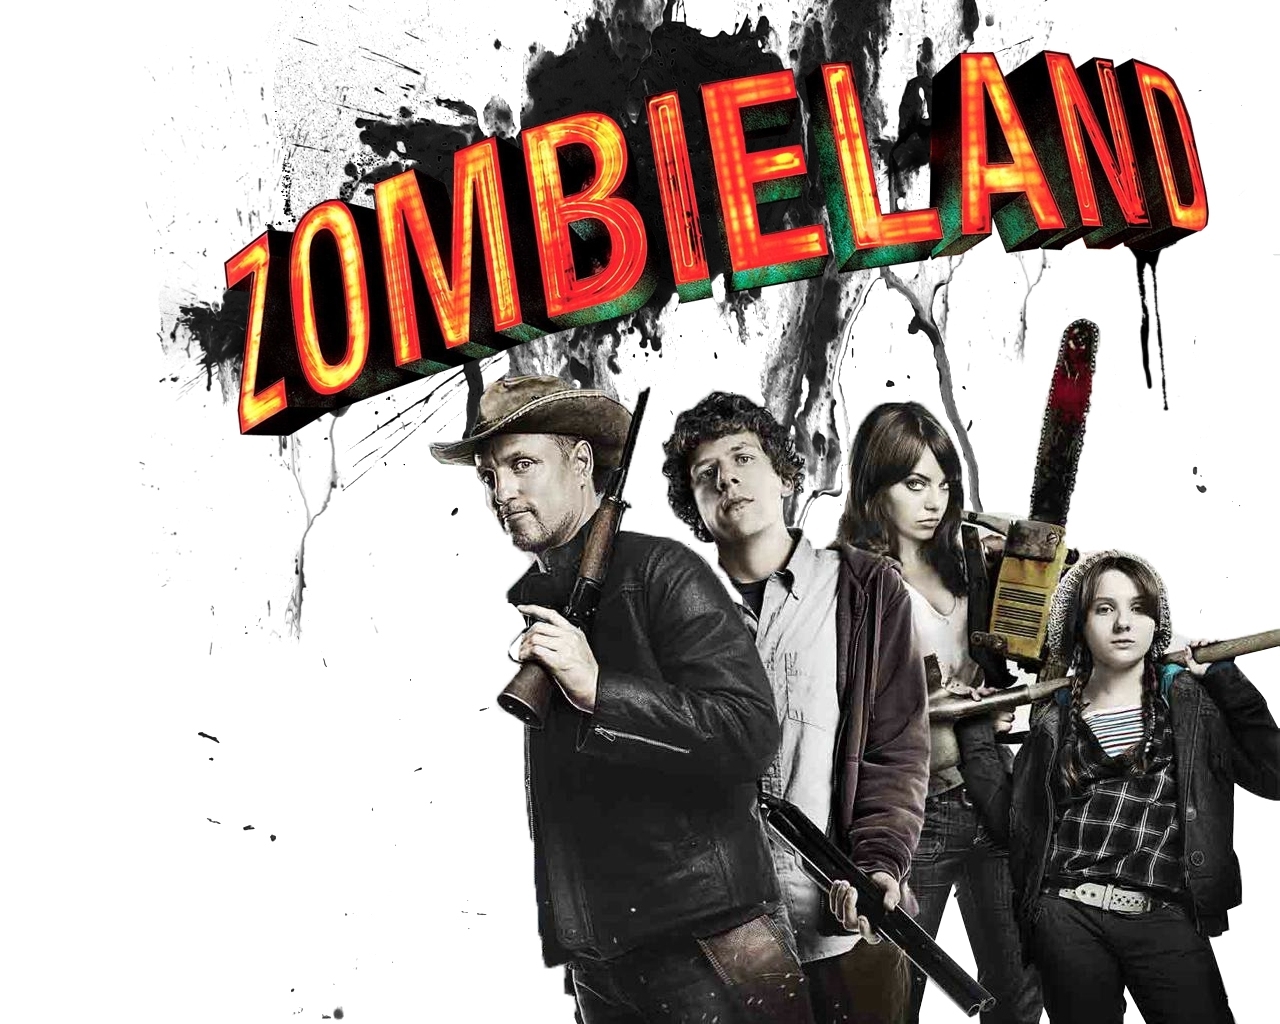 How Can Zombieland Change Your Life? | The Emerald of Sigma Pi Fraternity